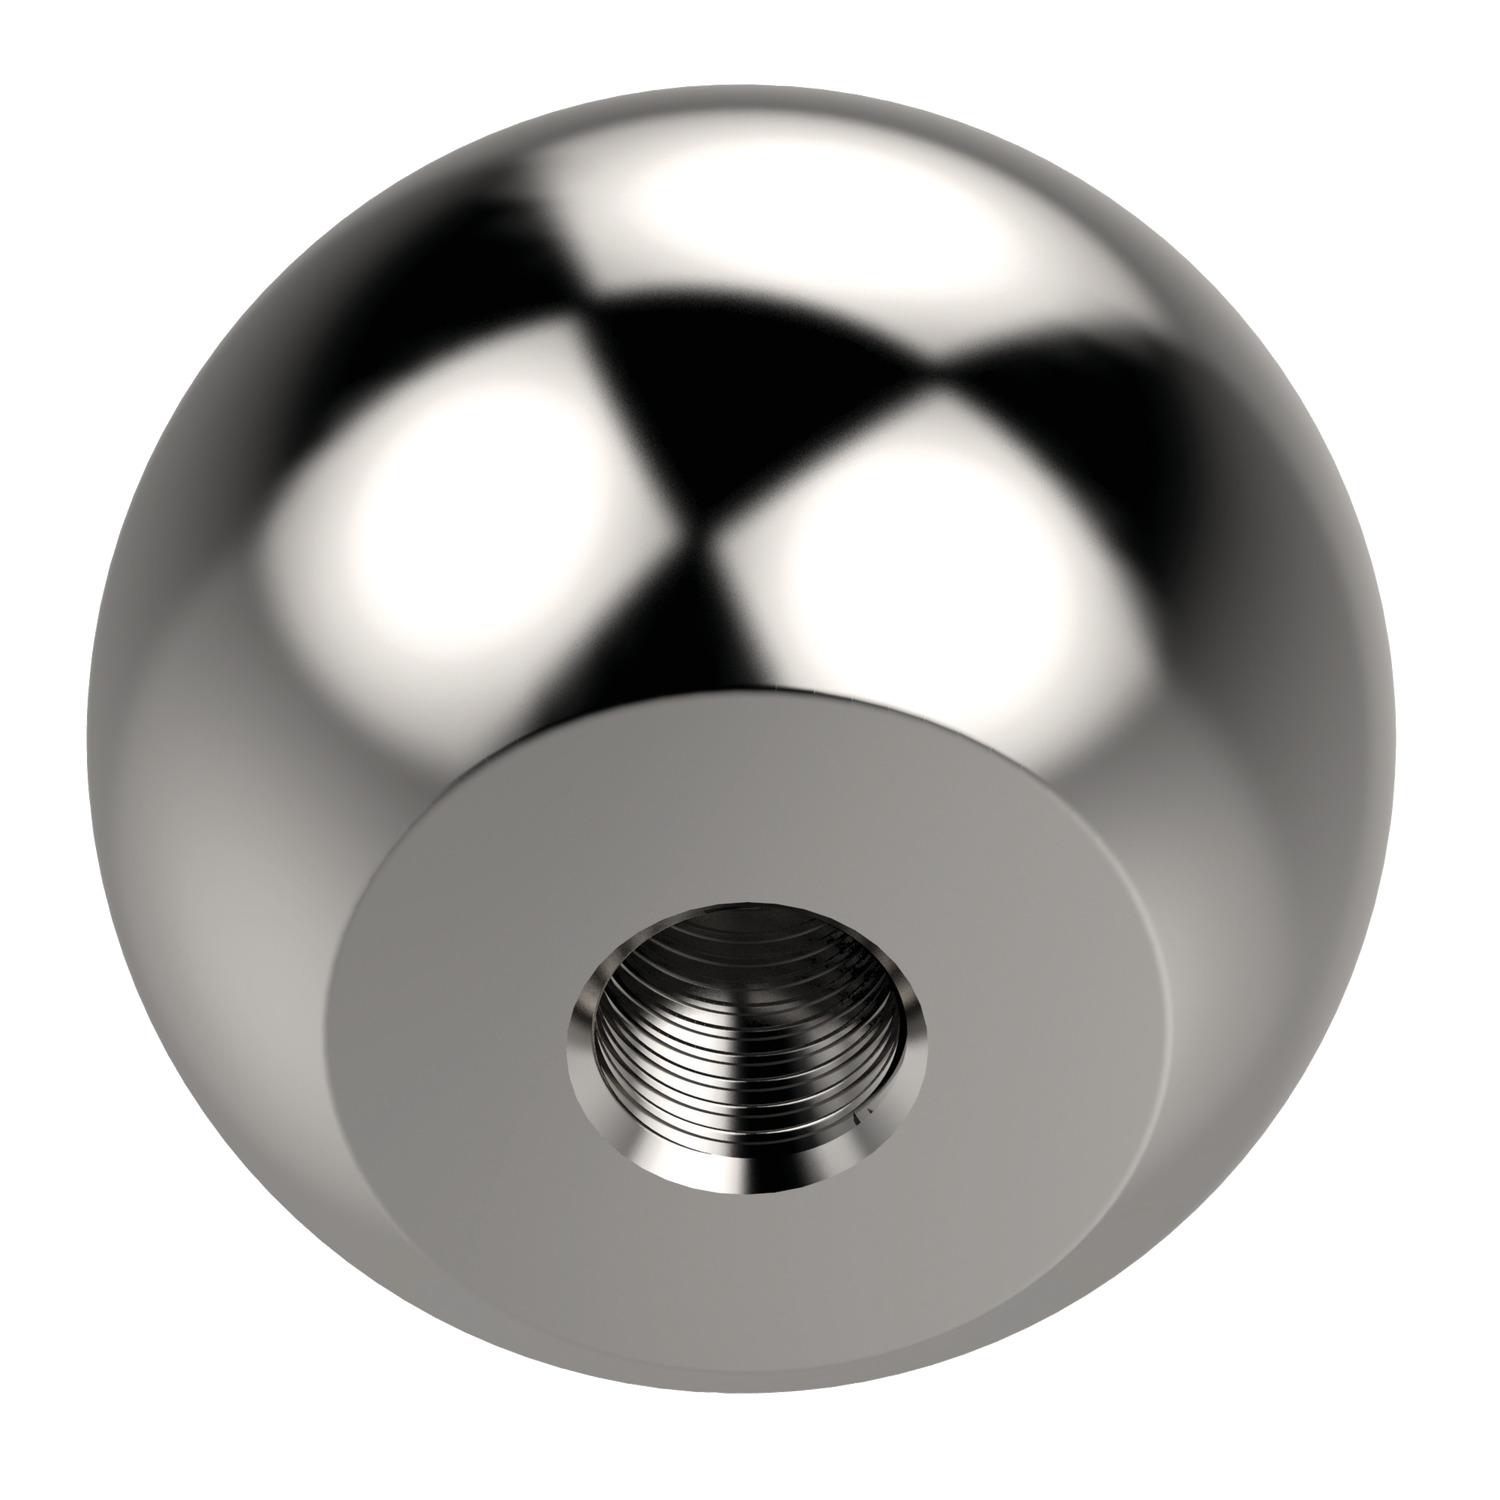 Product 73004, Ball Knobs - Stainless Steel similar to DIN 319 / 